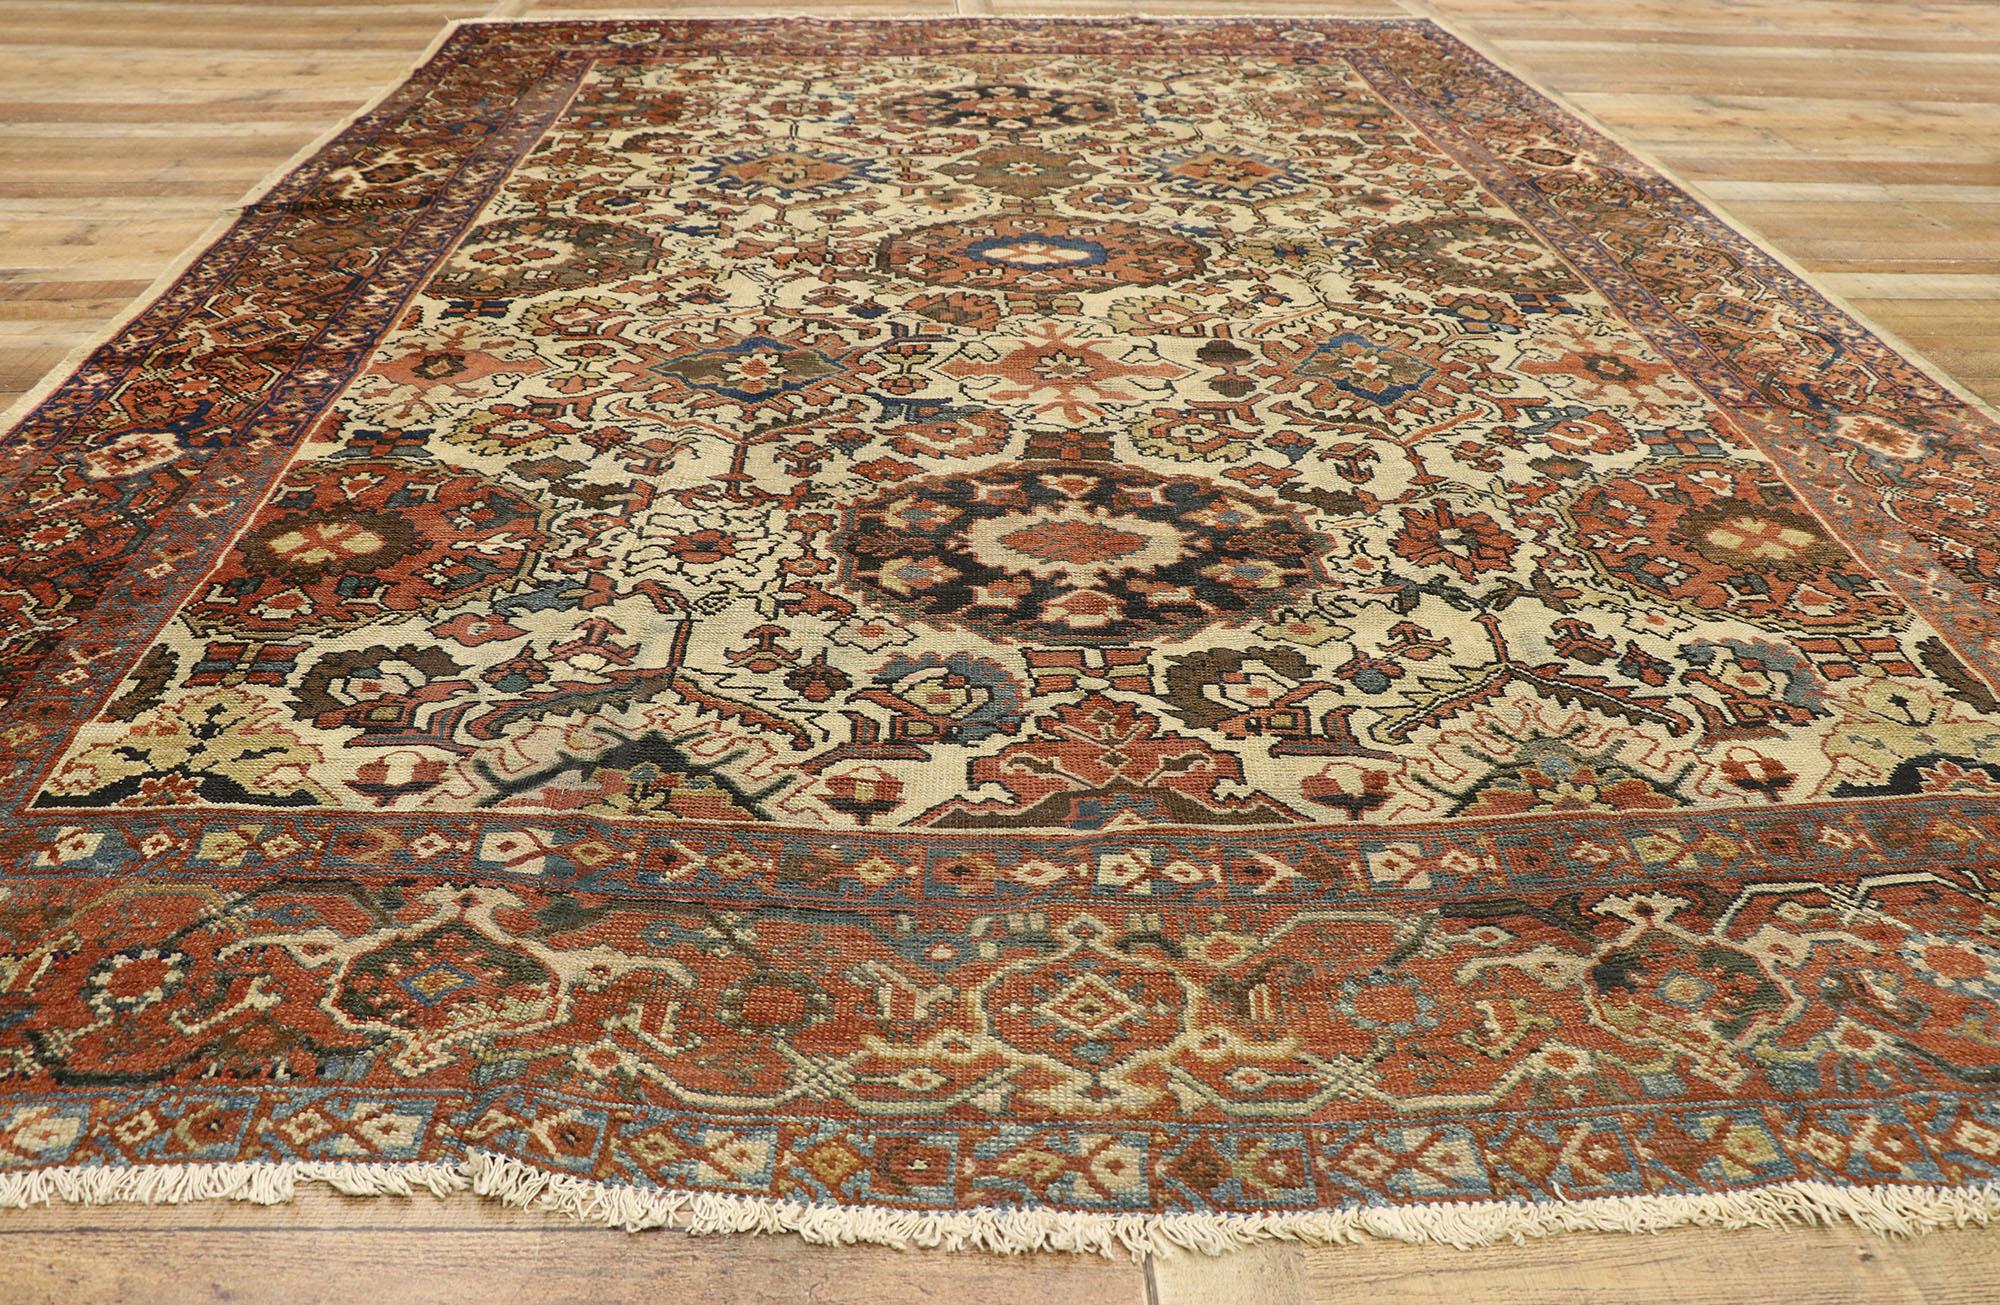 Antique Persian Mahal Rug with Rustic American Colonial Style In Distressed Condition For Sale In Dallas, TX